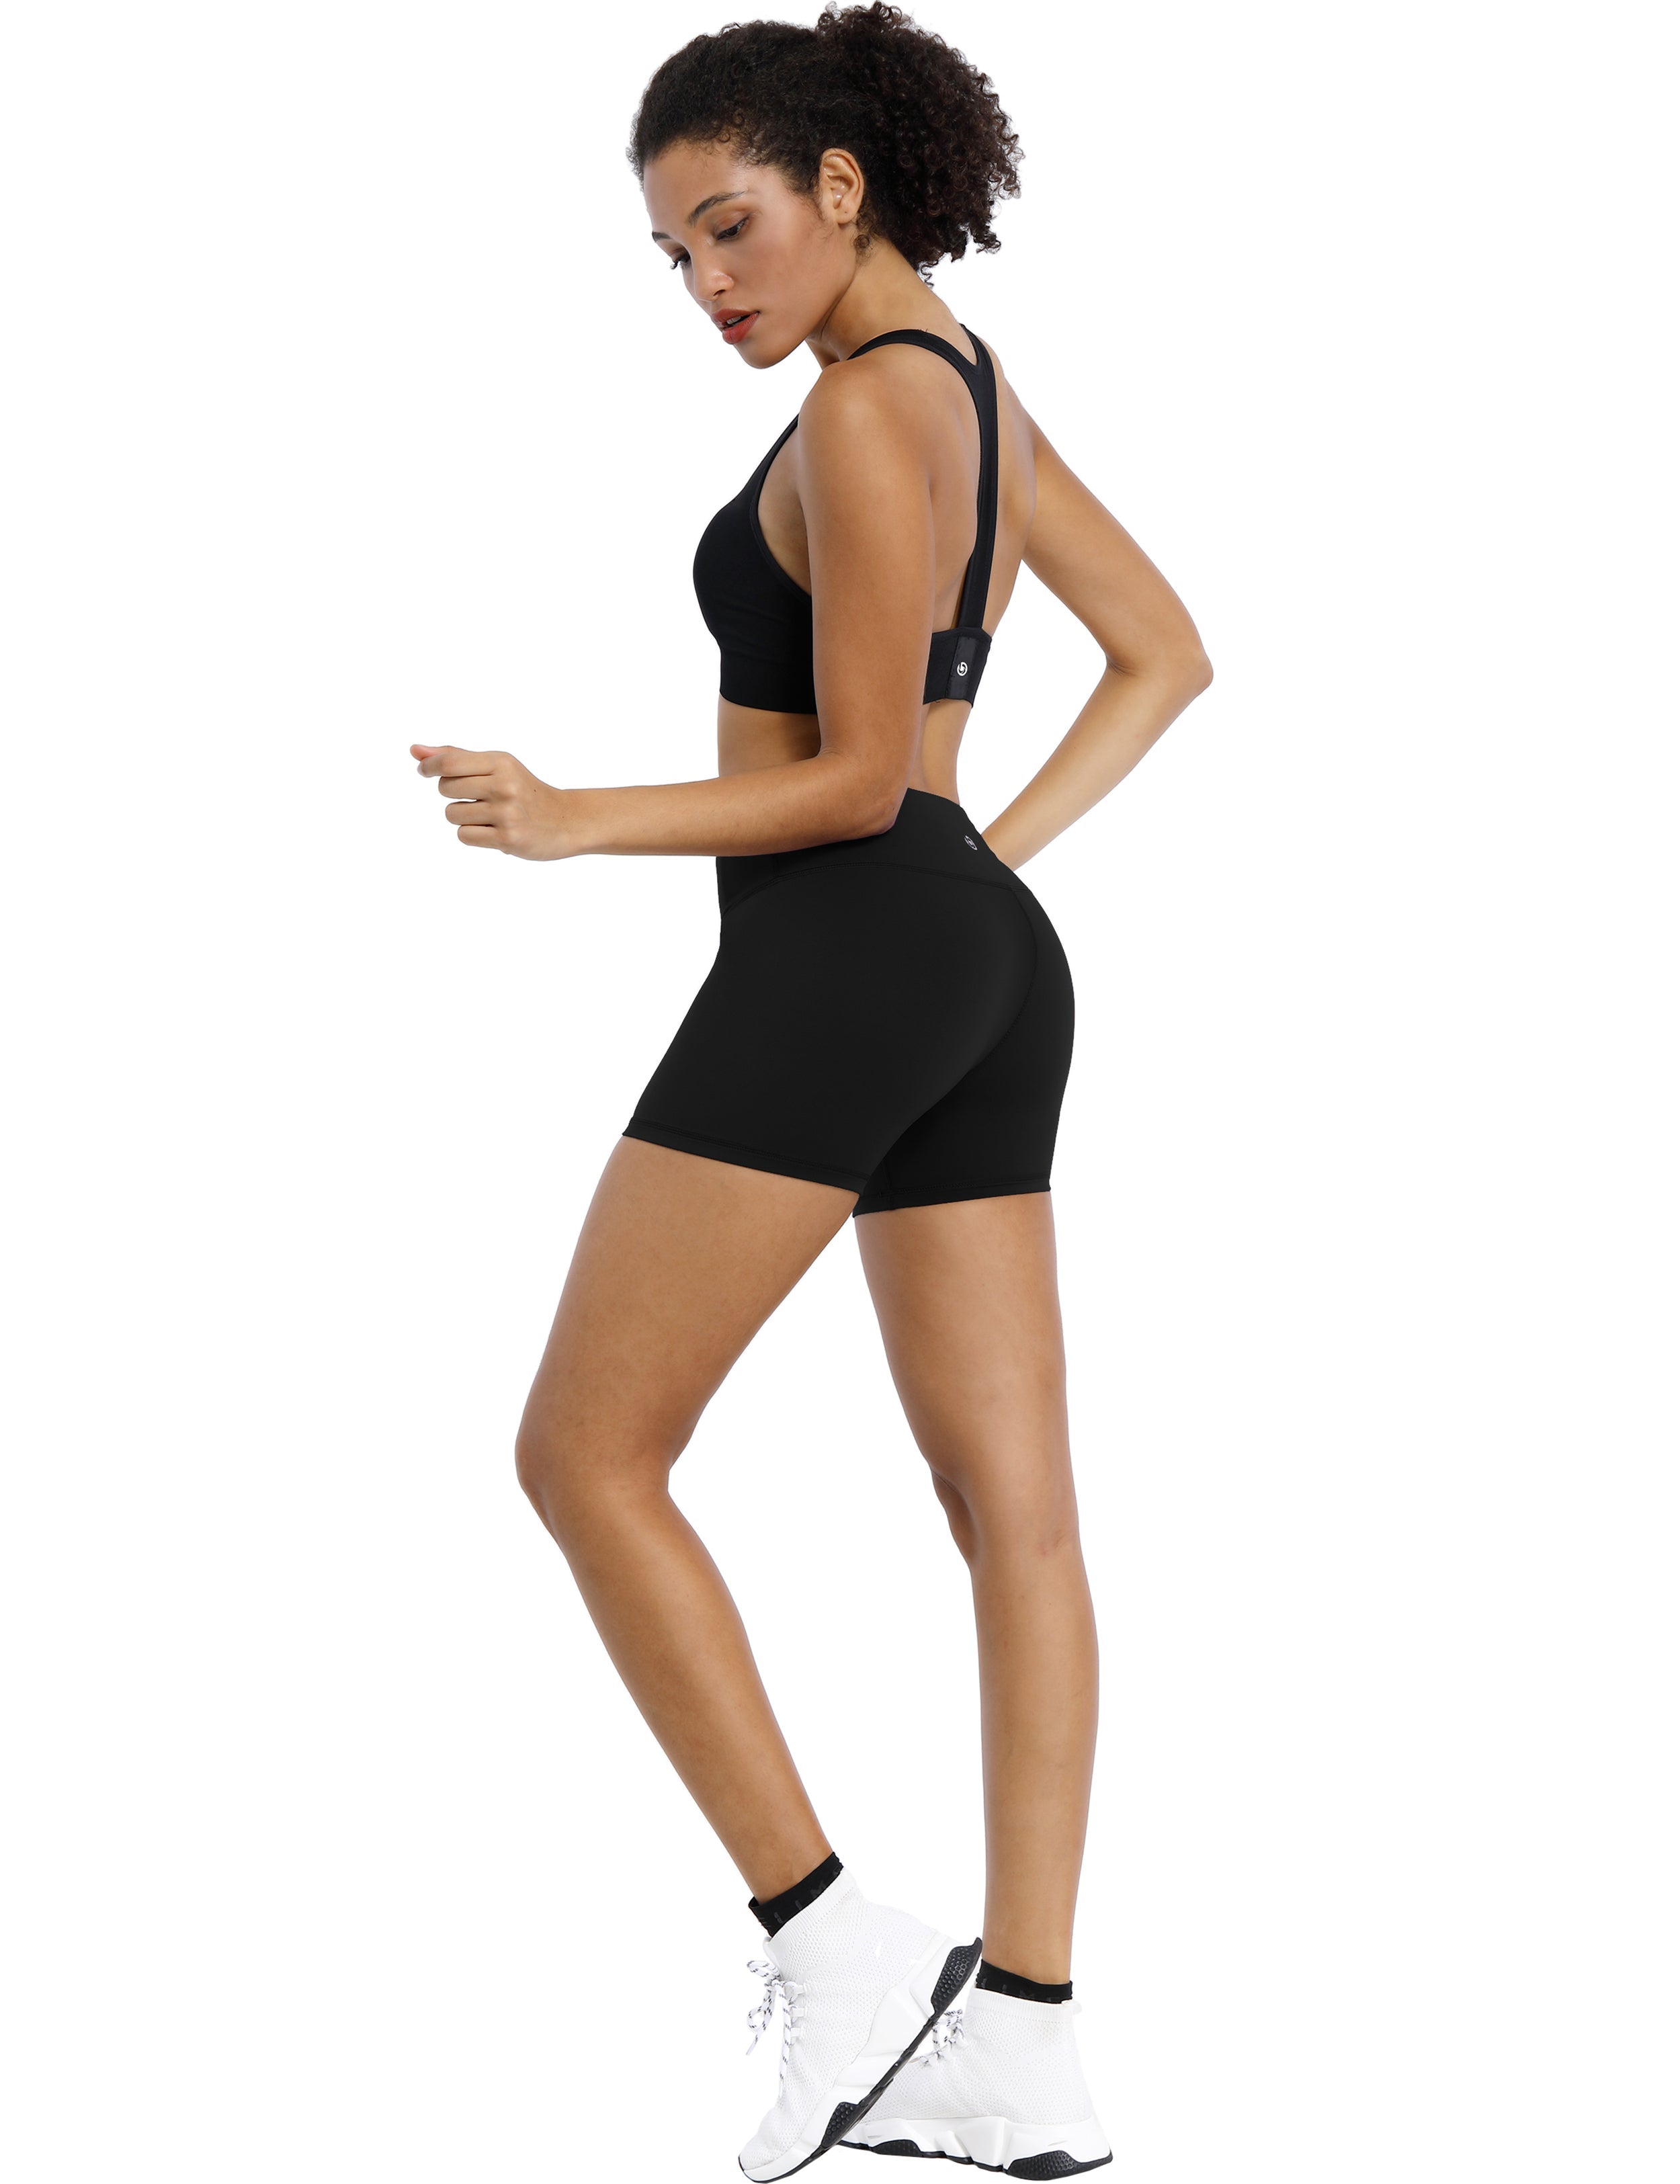 4" Pilates Shorts black Sleek, soft, smooth and totally comfortable: our newest style is here. Softest-ever fabric High elasticity High density 4-way stretch Fabric doesn't attract lint easily No see-through Moisture-wicking Machine wash 75% Nylon, 25% Spandex